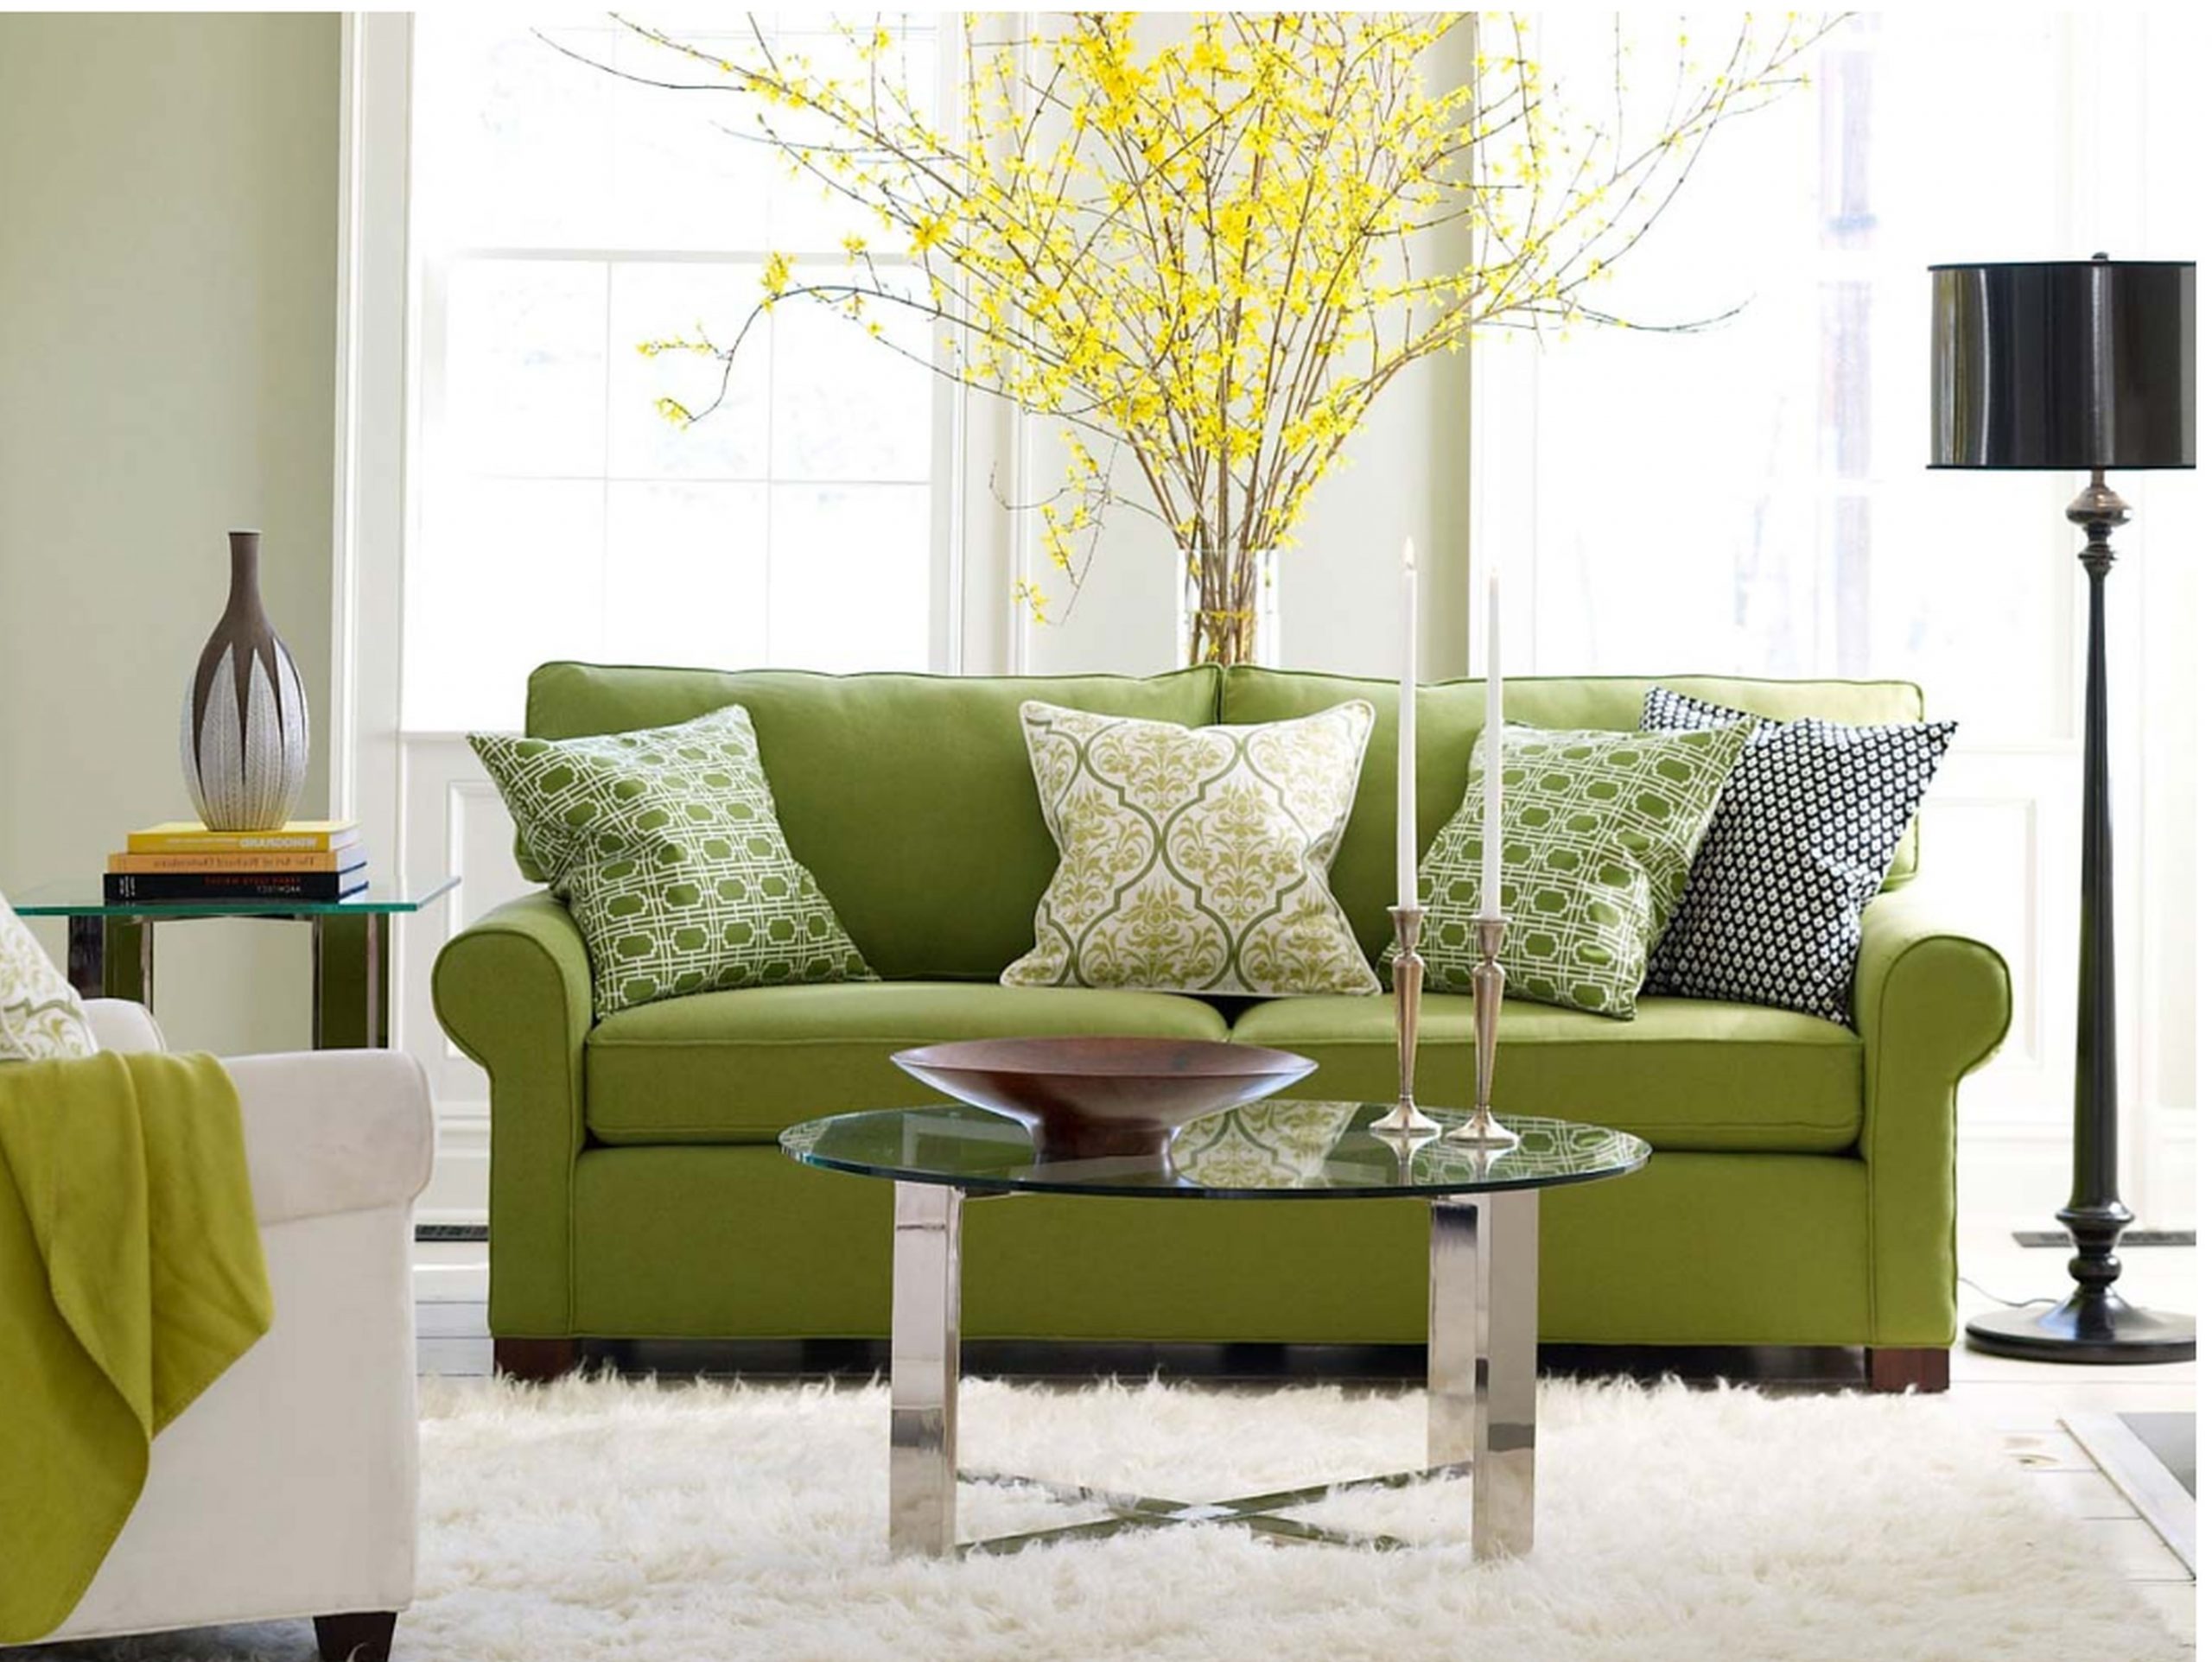 Green sofa in living room with yellow plant behind